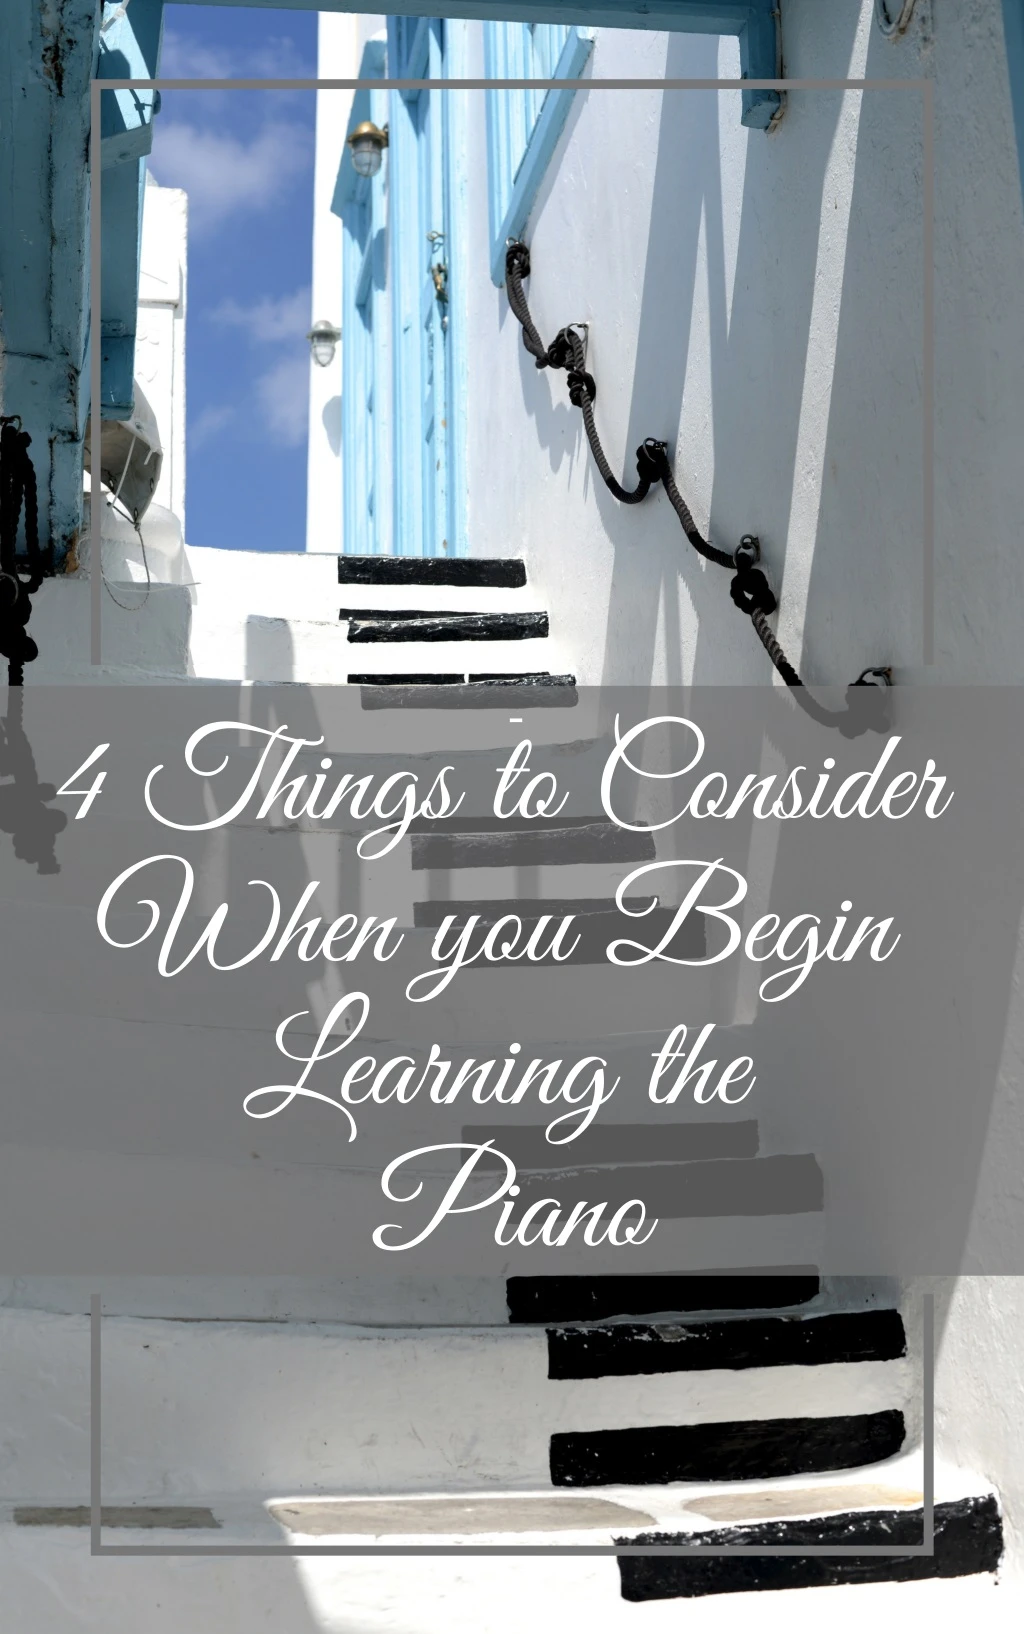 4 things to consider when you begin learning